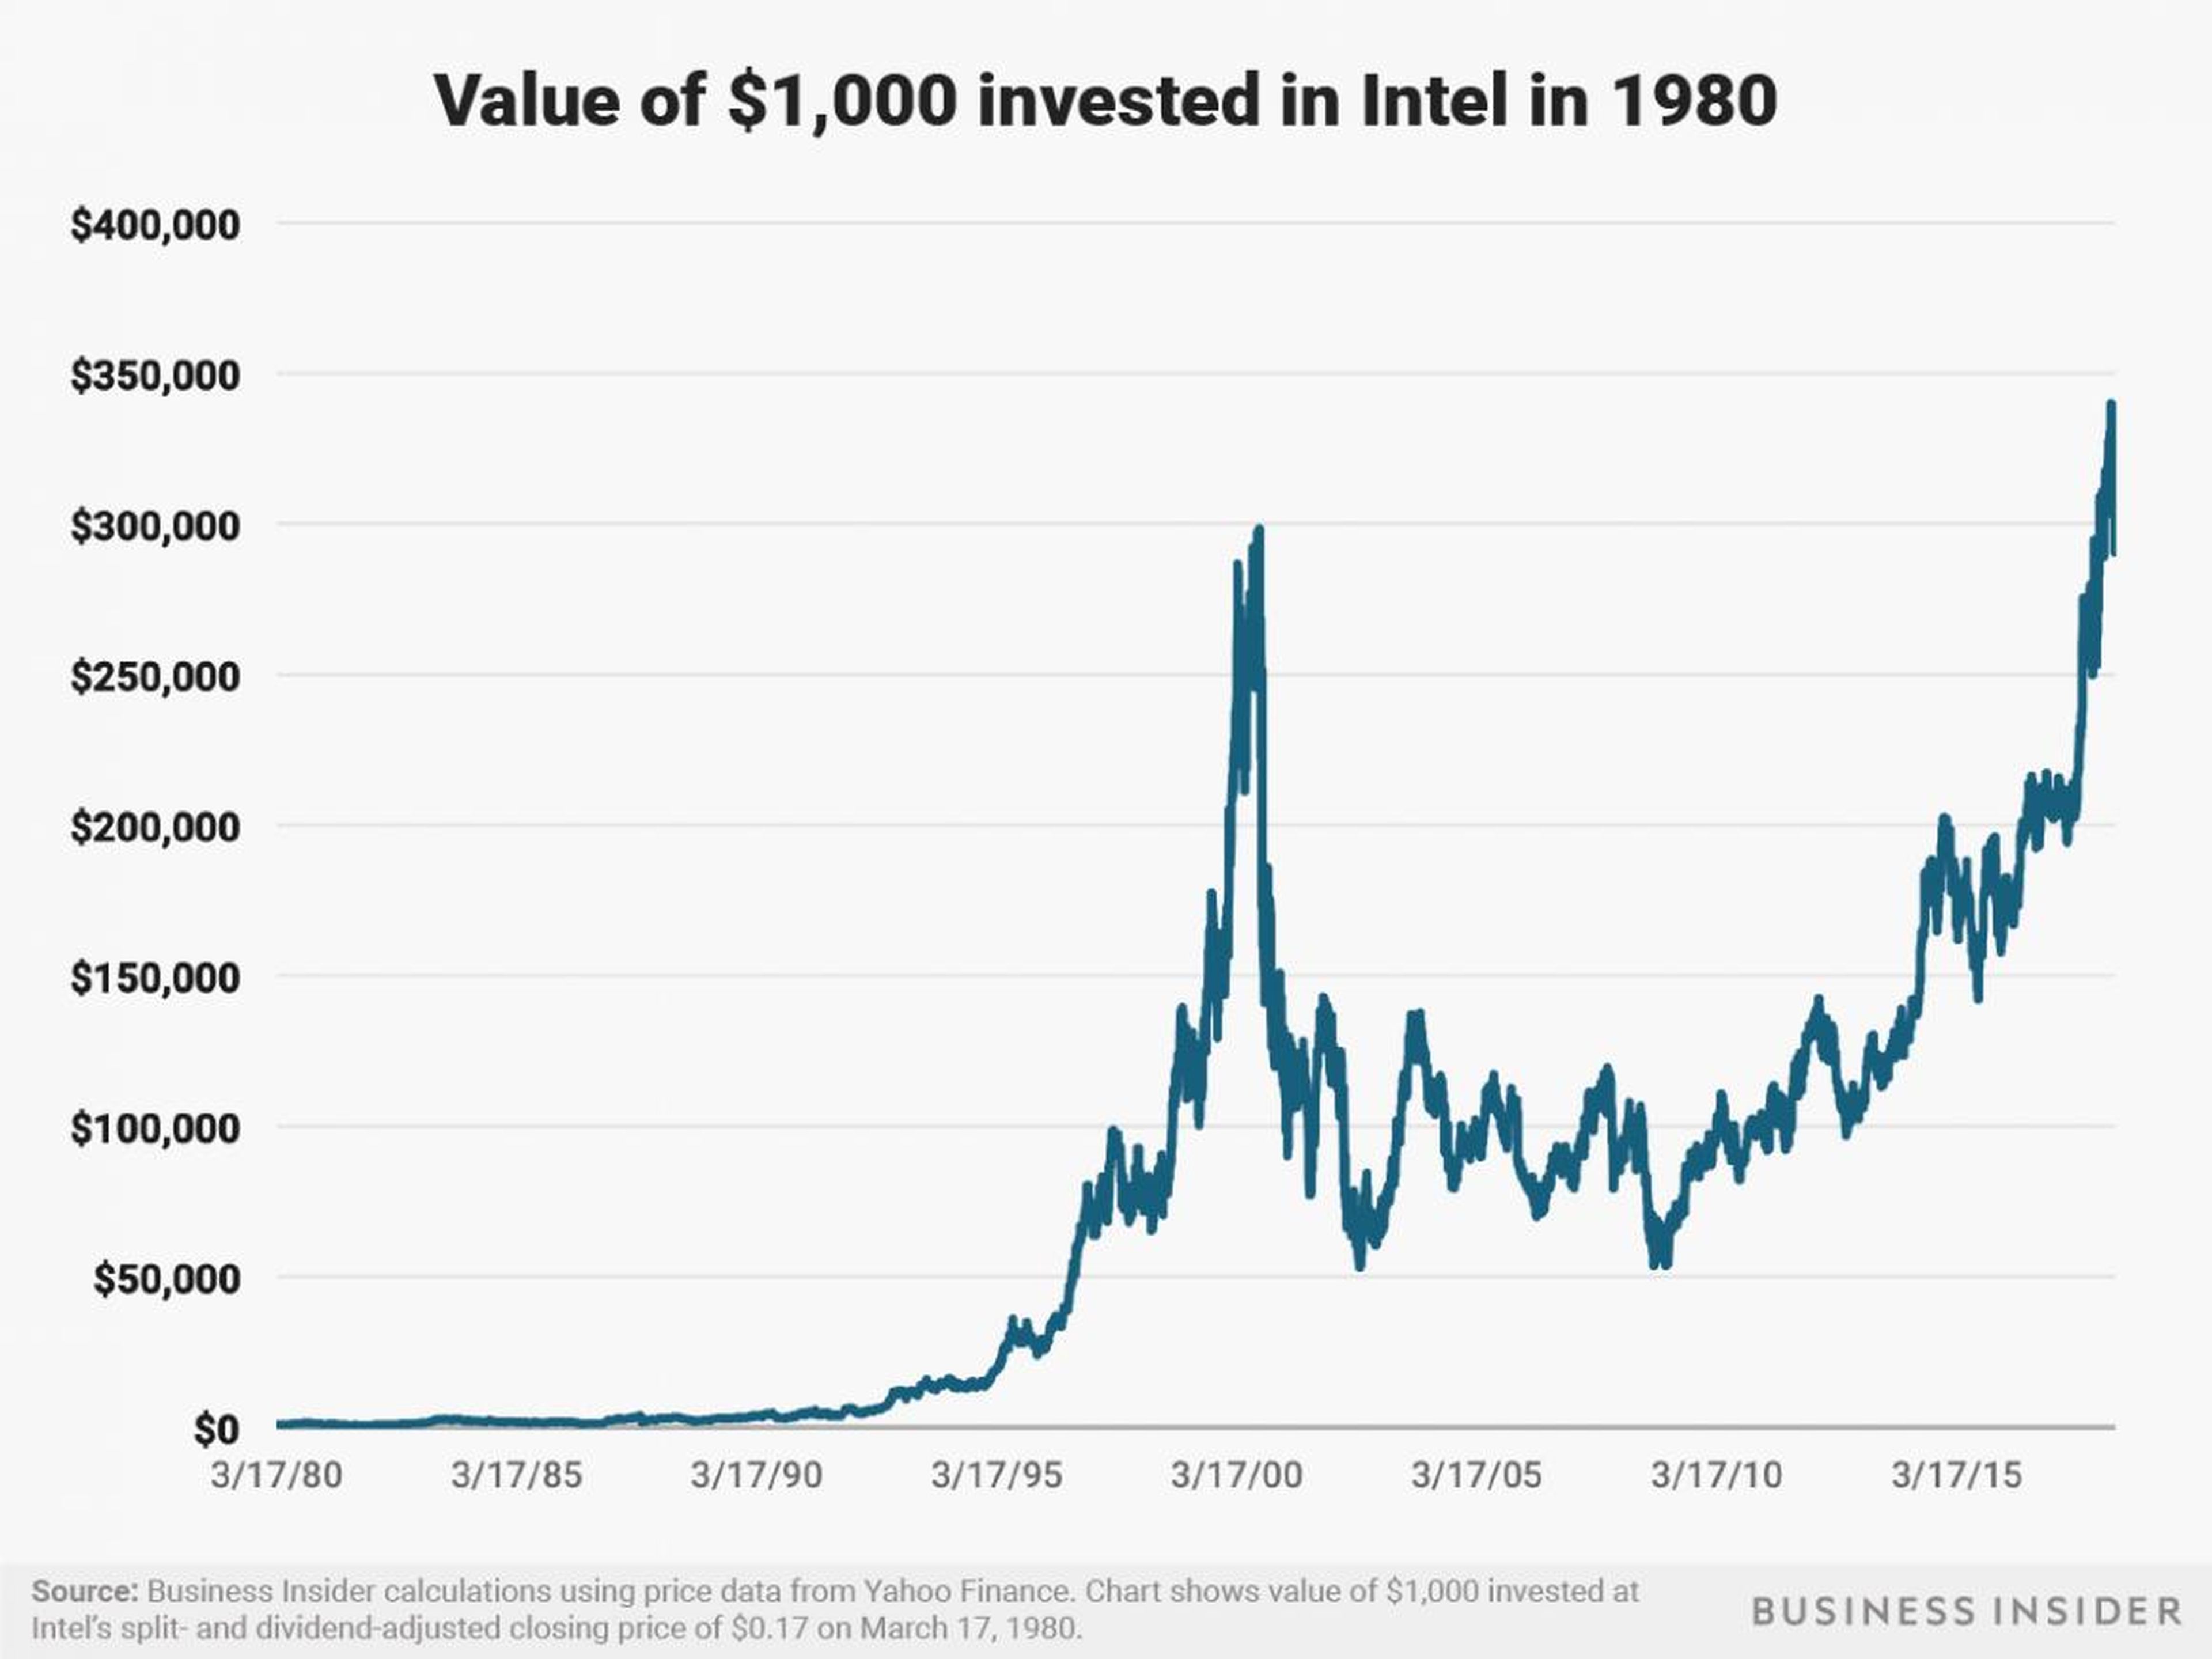 A $1,000 investment in Intel in 1980 would be worth about $300,000 today.